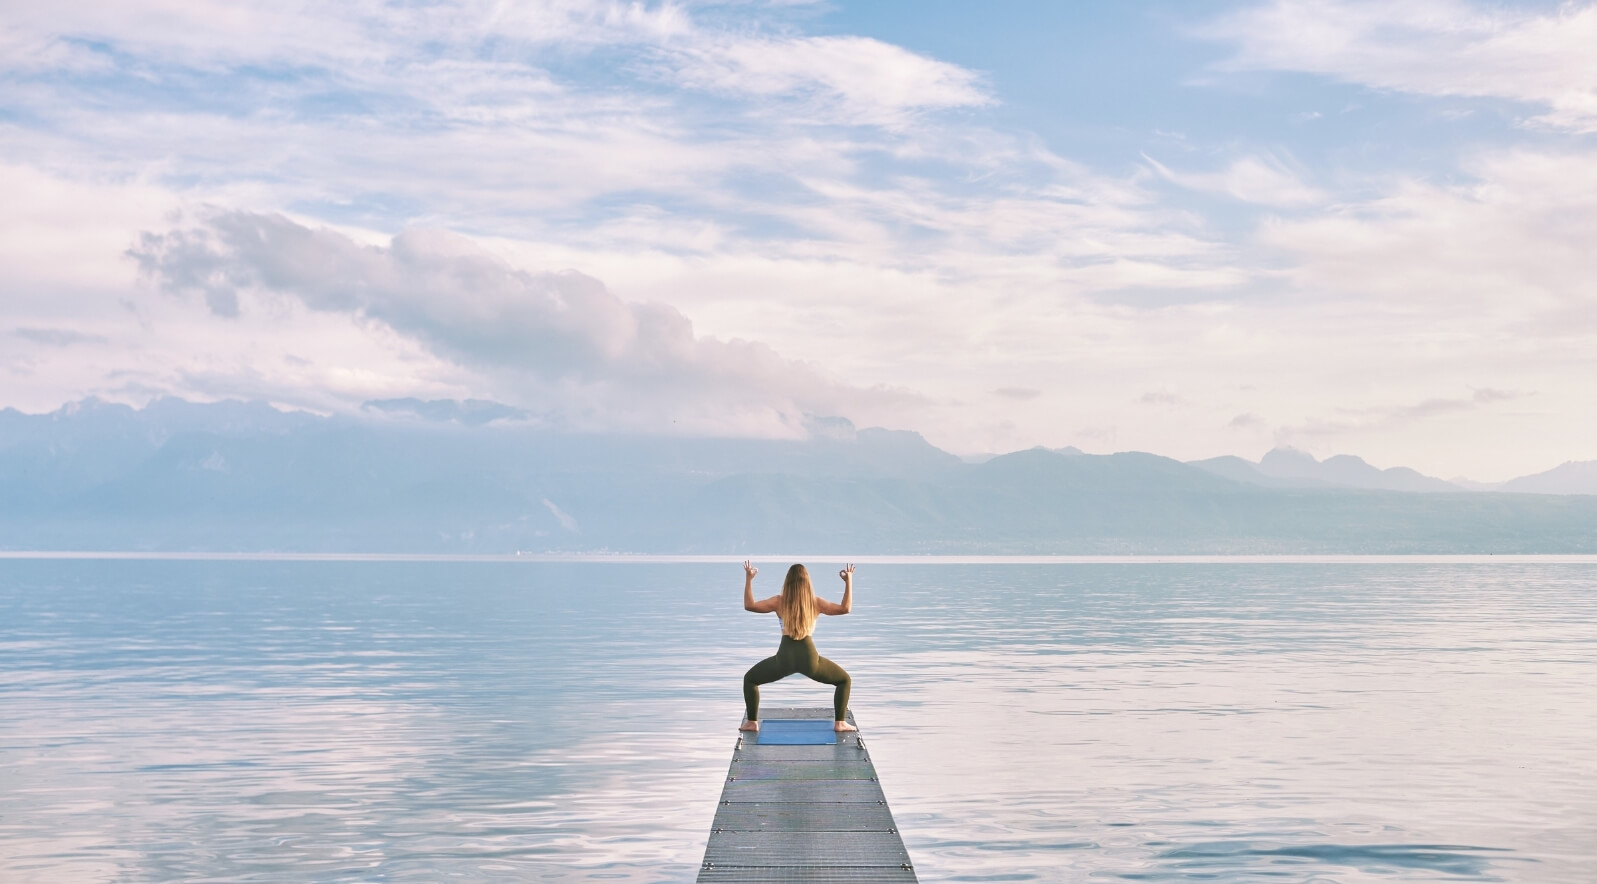 A woman meditating on a pier overlooking serene water with mountains in the background